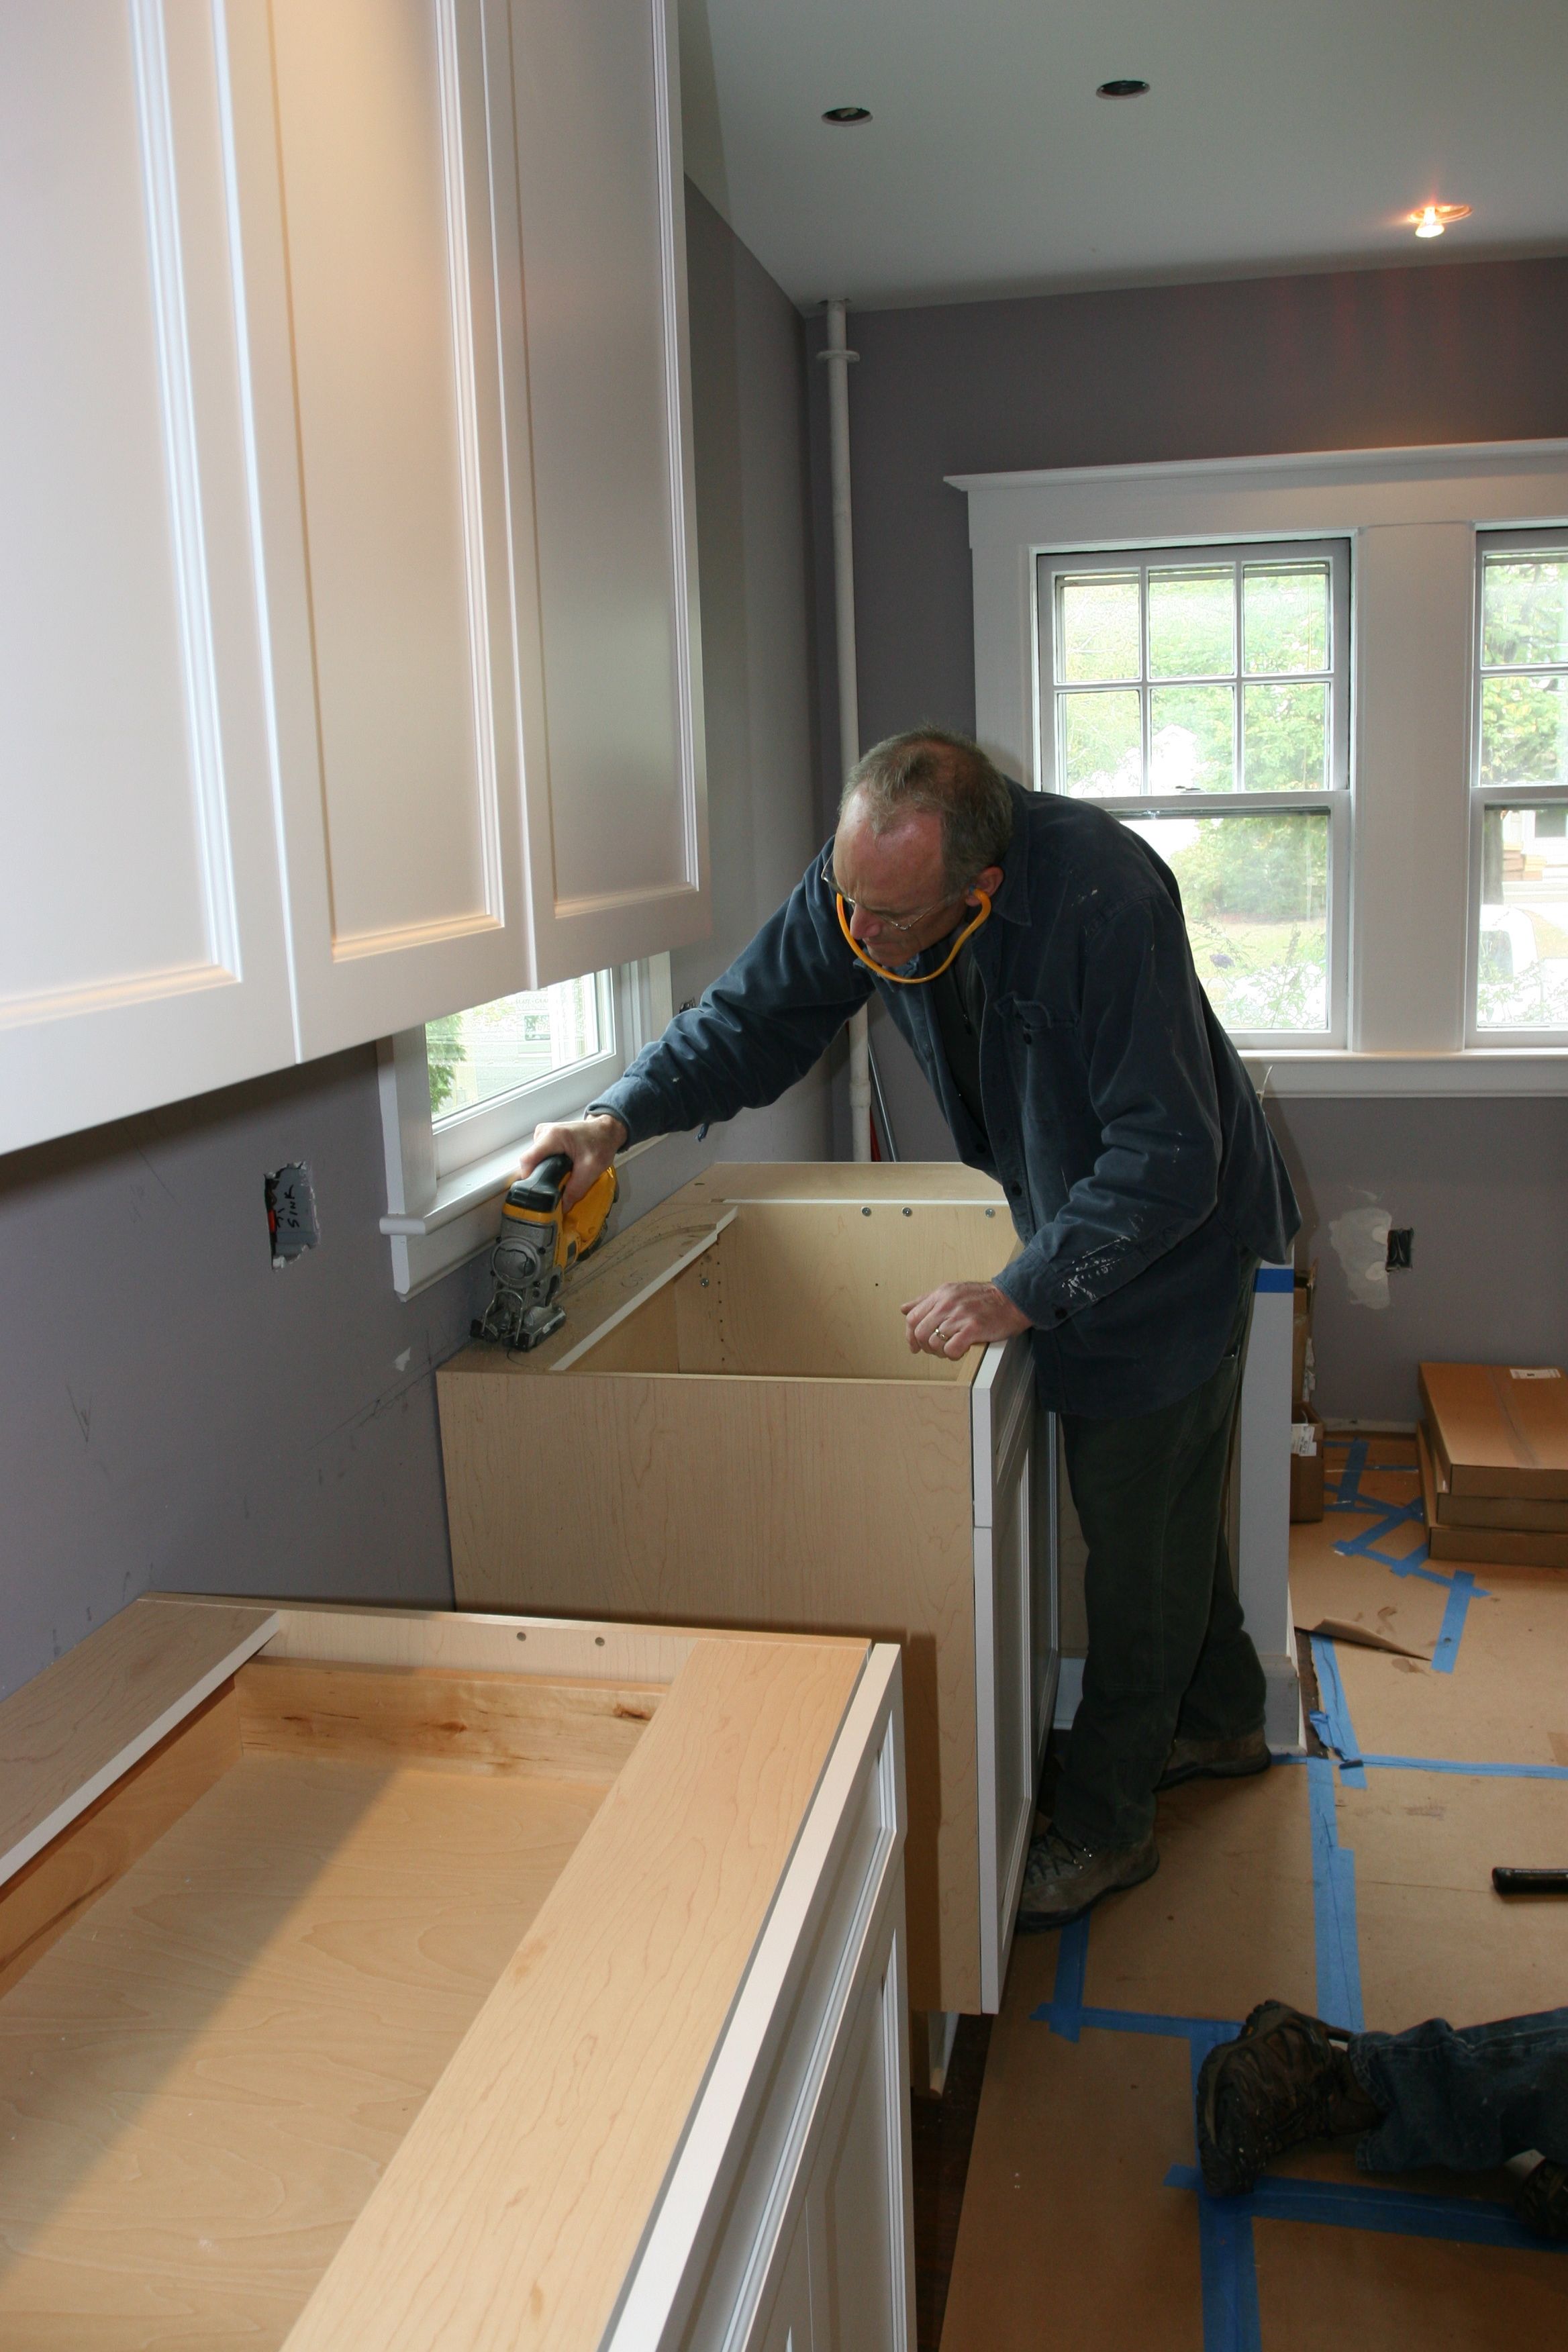 Tom cutting out the part of the cabinet that will interfere with the sink basin.